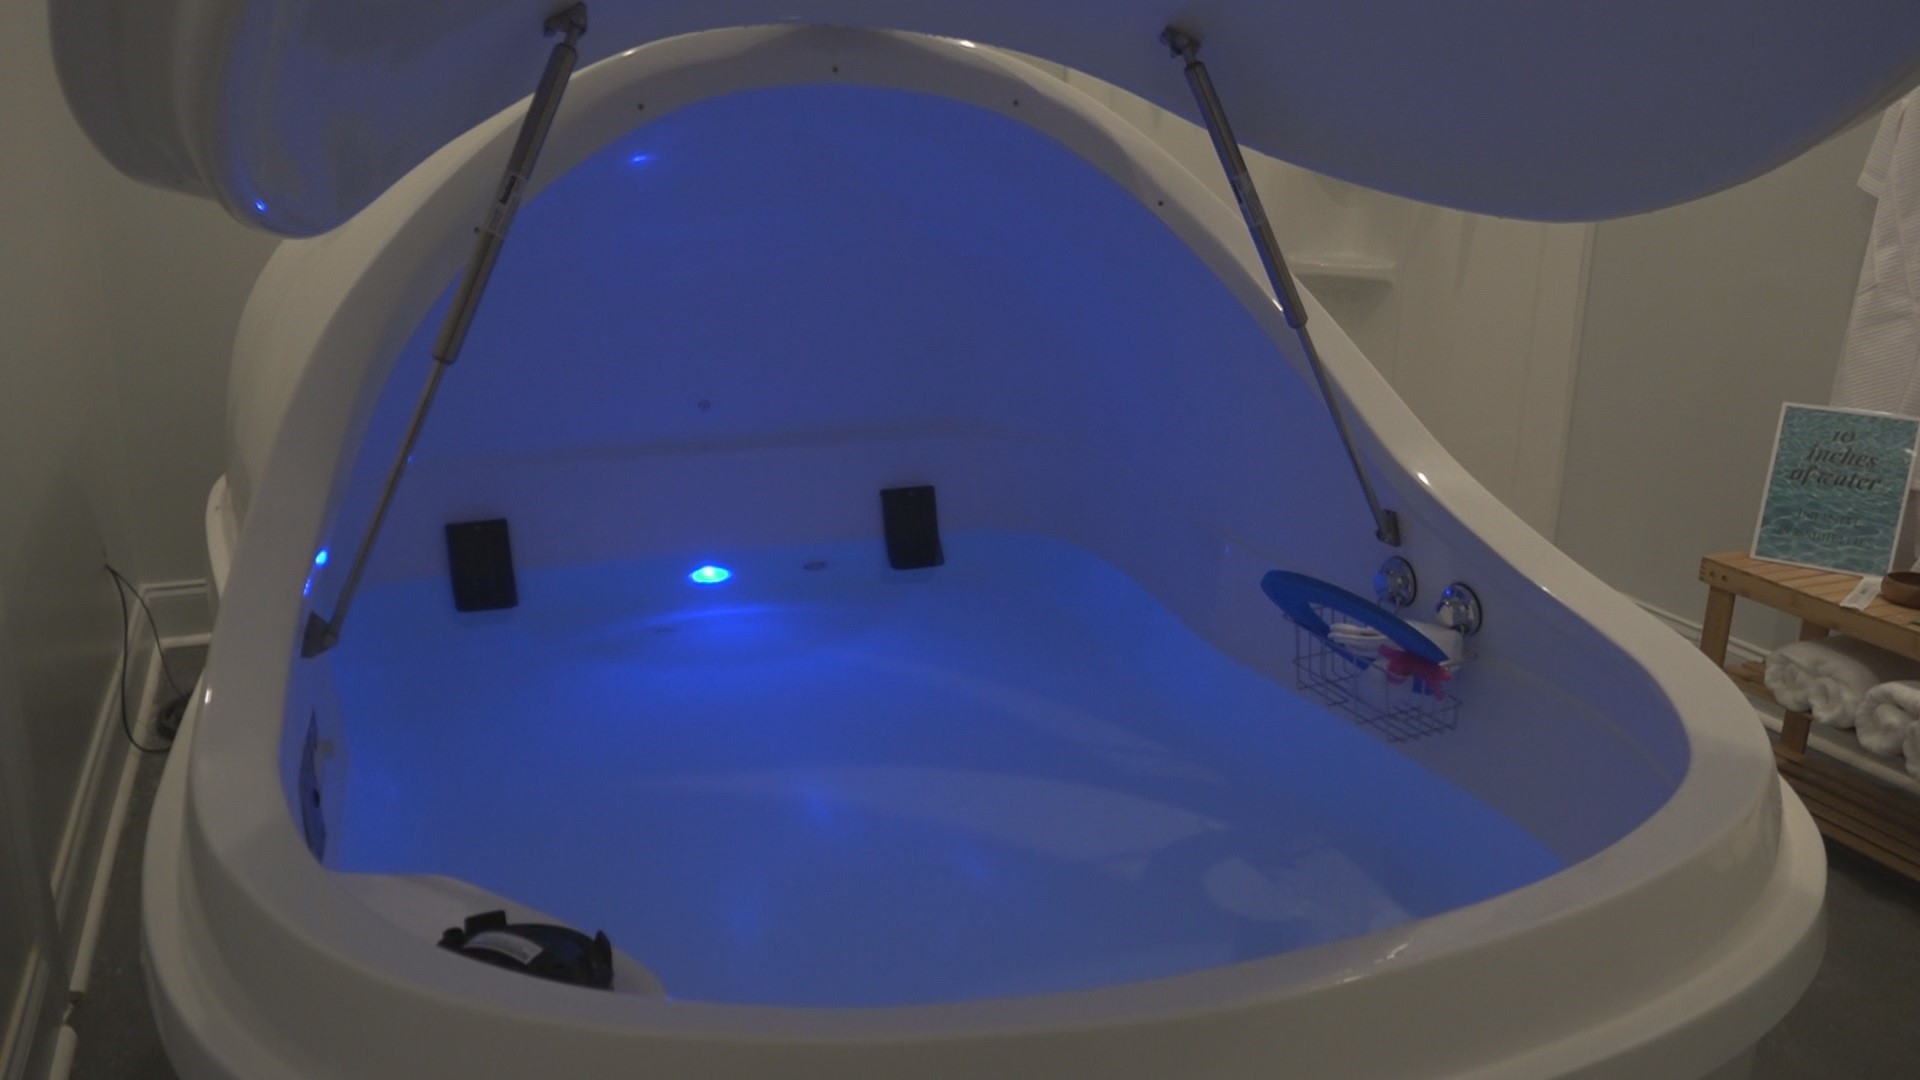 Sensory deprivation tanks do they really help with relaxation